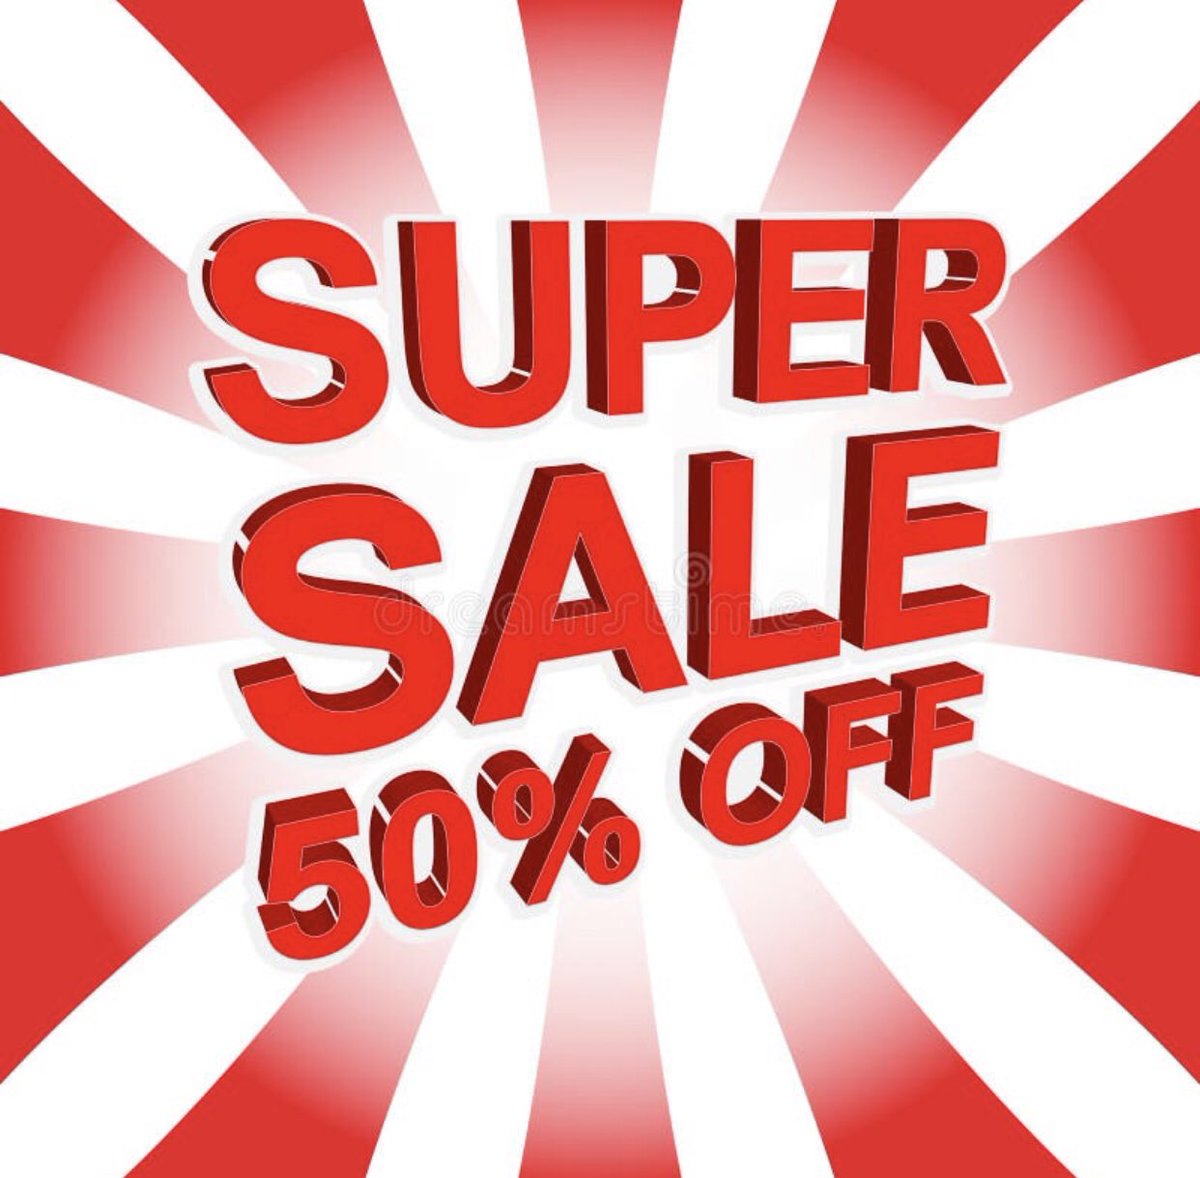 50% OFF Everything today from 4pm-8pm & tomorrow 11am-7pm!!! Tell Everyone you know about this Super Sale which includes Comics, Vinyl, Games, Graphic Novels, Manga, Collectibles, Statues, & More! #OxfordOhio #LocalComicShop #SuperSale #Sale #ButlerCounty #HamiltonOhio